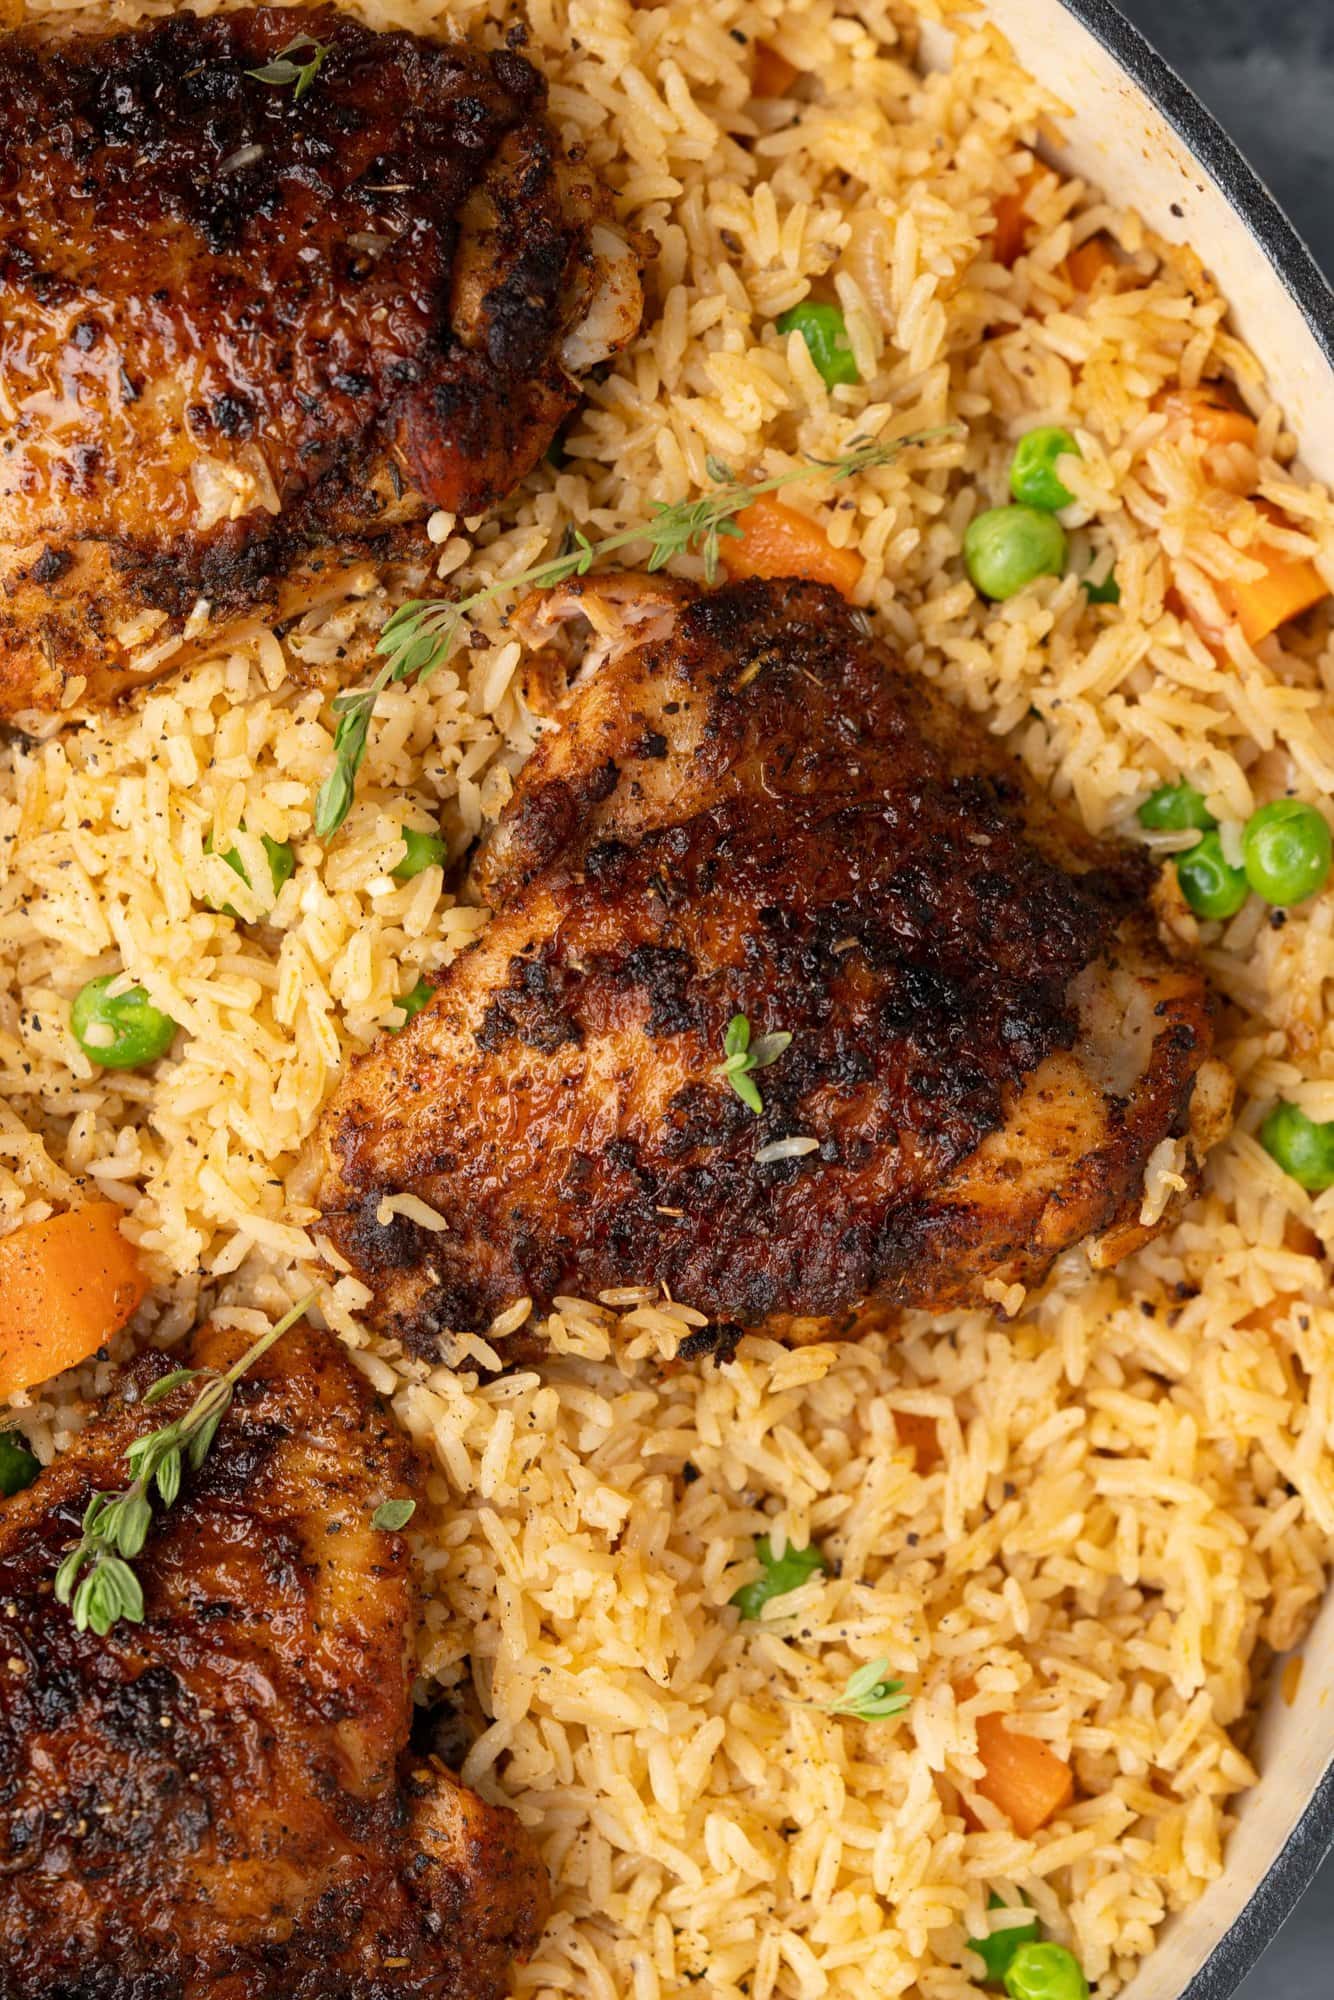 Image shows crispy chicken thigh baked along with flavored rice, with green peas and carrots.